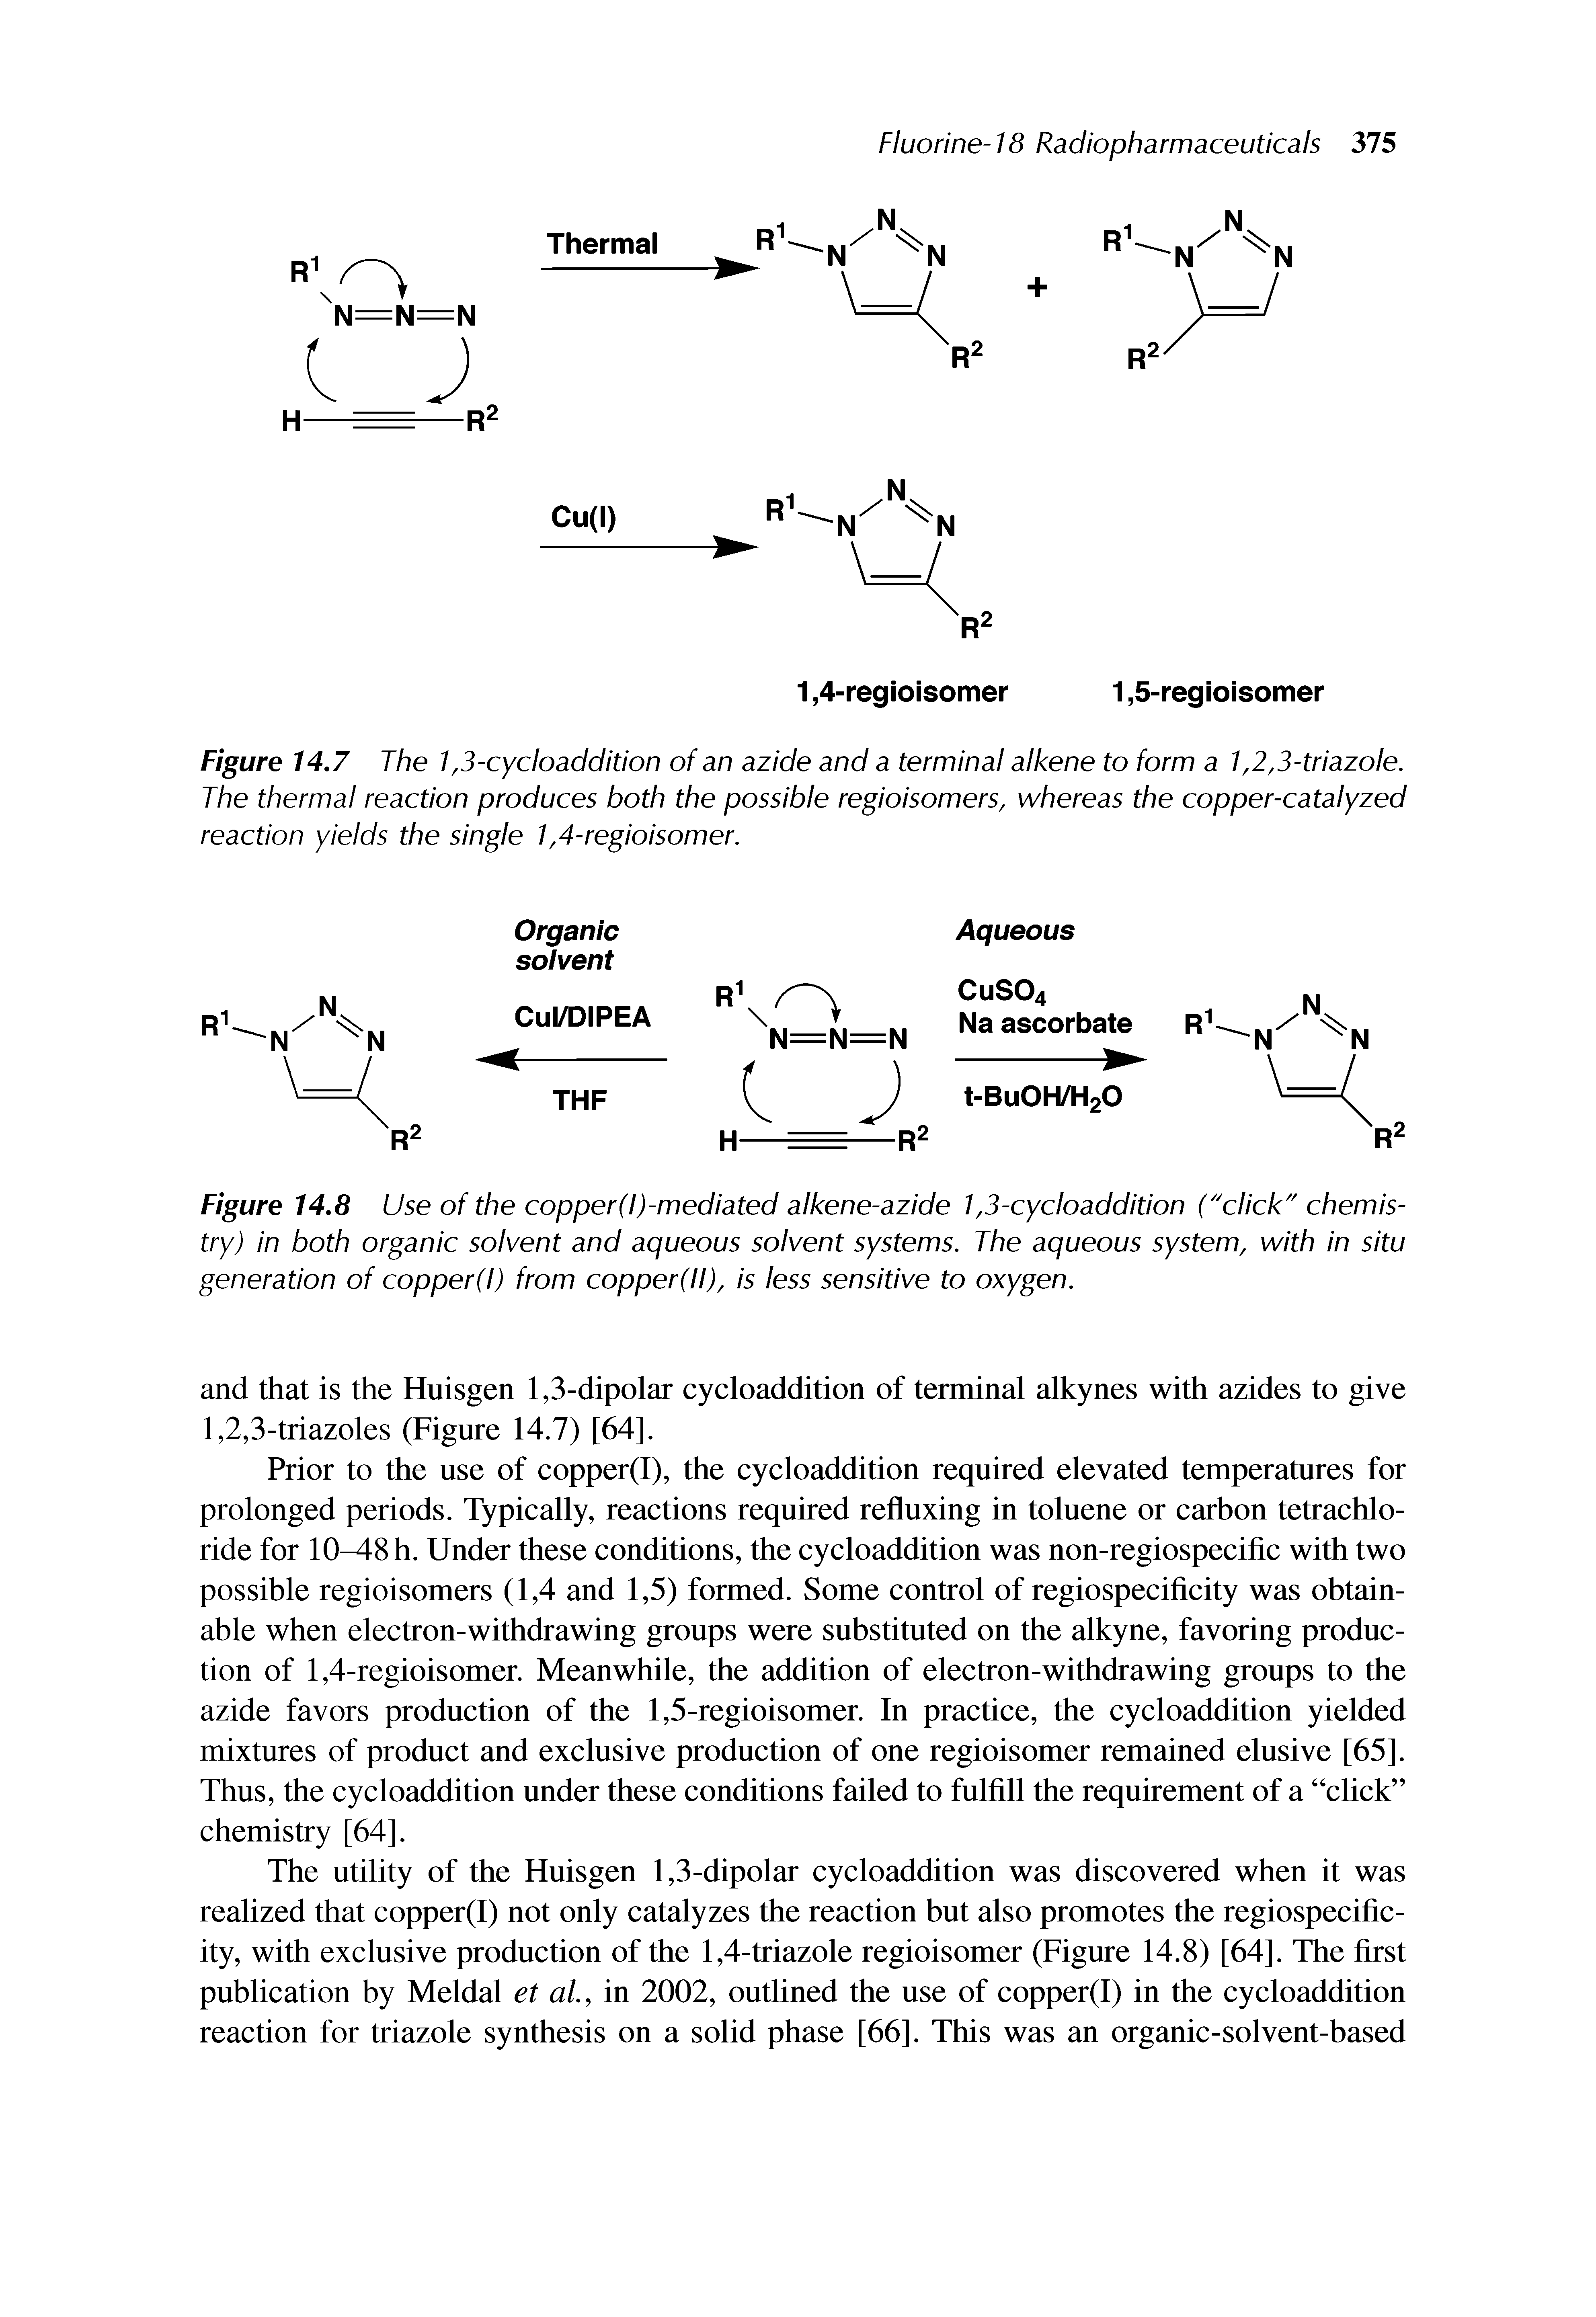 Figure 14.8 Use of the copper(l)-mediated alkene-azide 1,3-cycloaddition ("click" chemistry) in both organic solvent and aqueous solvent systems. The aqueous system, with in situ generation of copper(l) from copper(II), is less sensitive to oxygen.